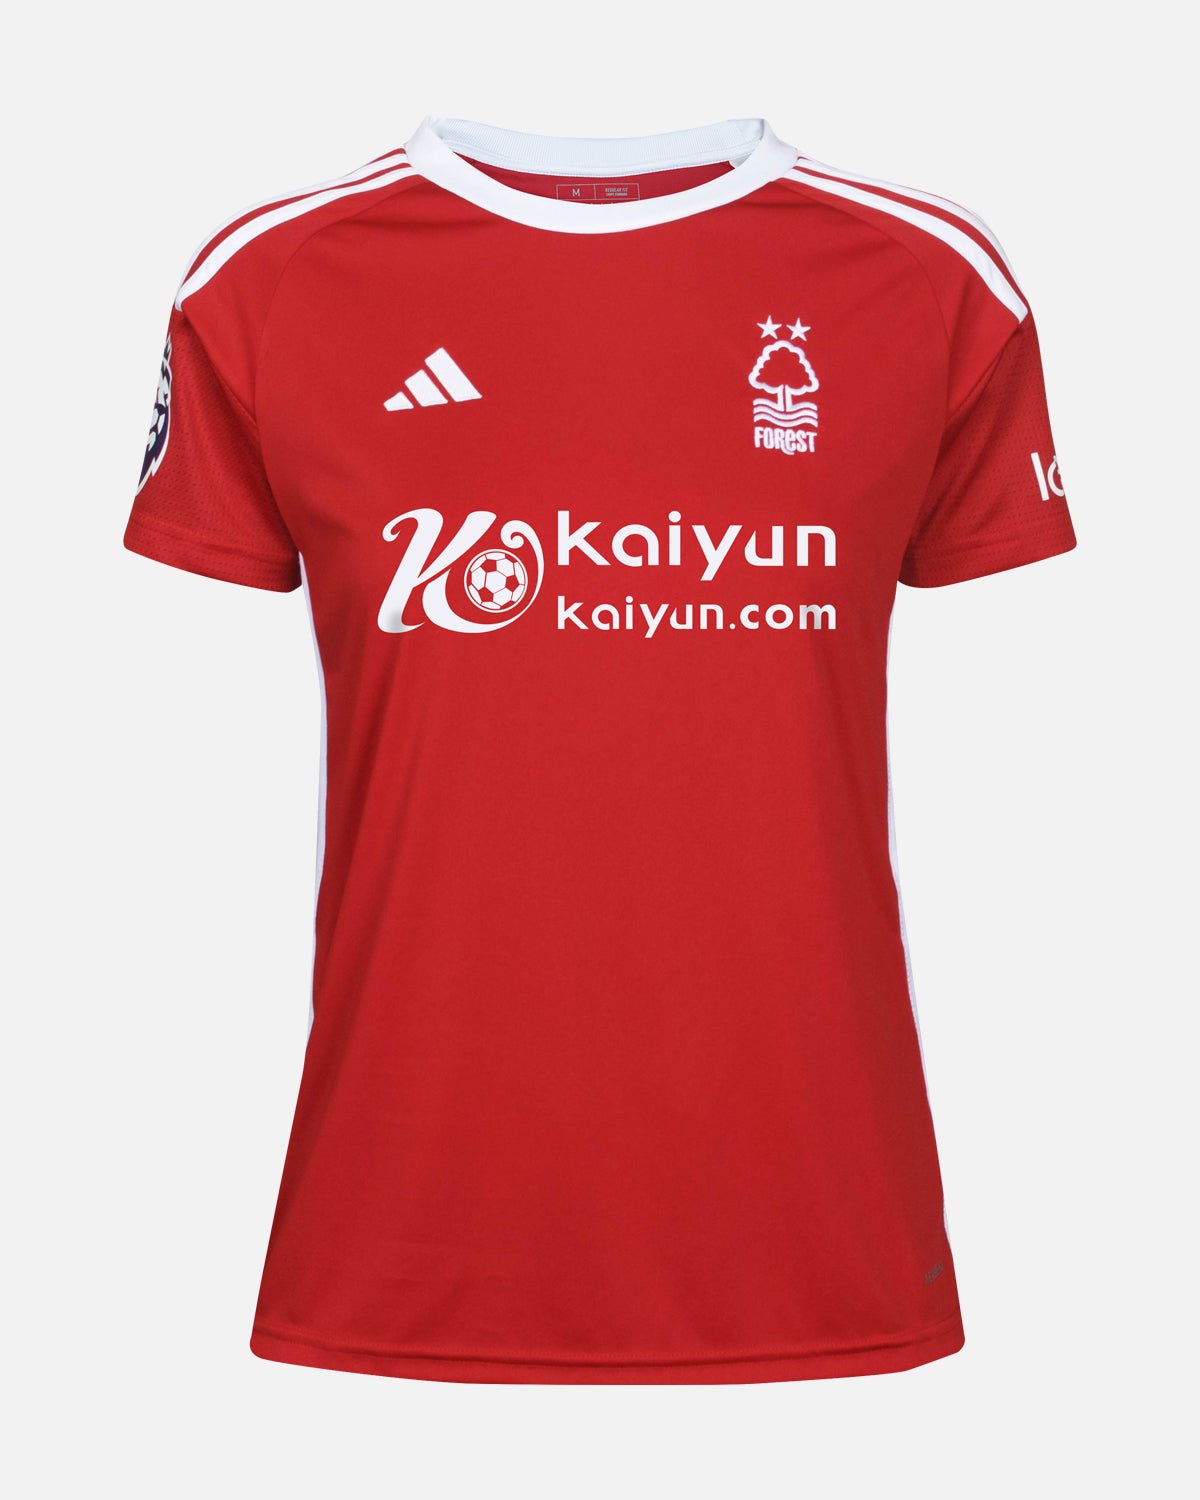 NFFC Women's Home Shirt 23-24 - Yates 22 - Nottingham Forest FC